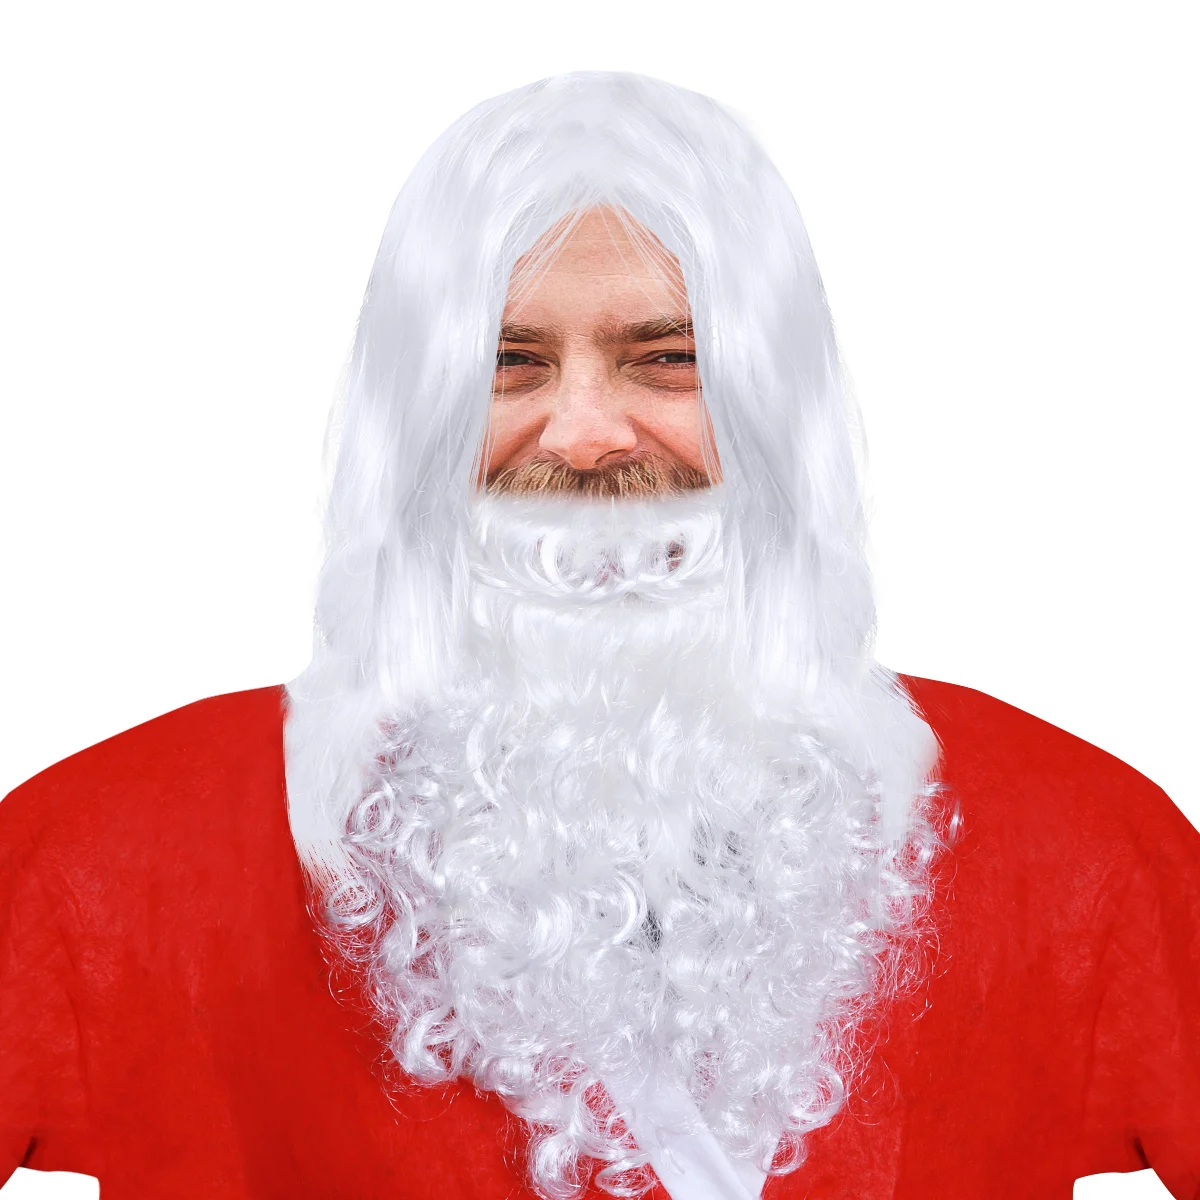 

WINOMO Deluxe White Santa Fancy Dress Costume Wizard Wig And Beard Set For Christmas Party Cosplay Santa Claus White Beard Party